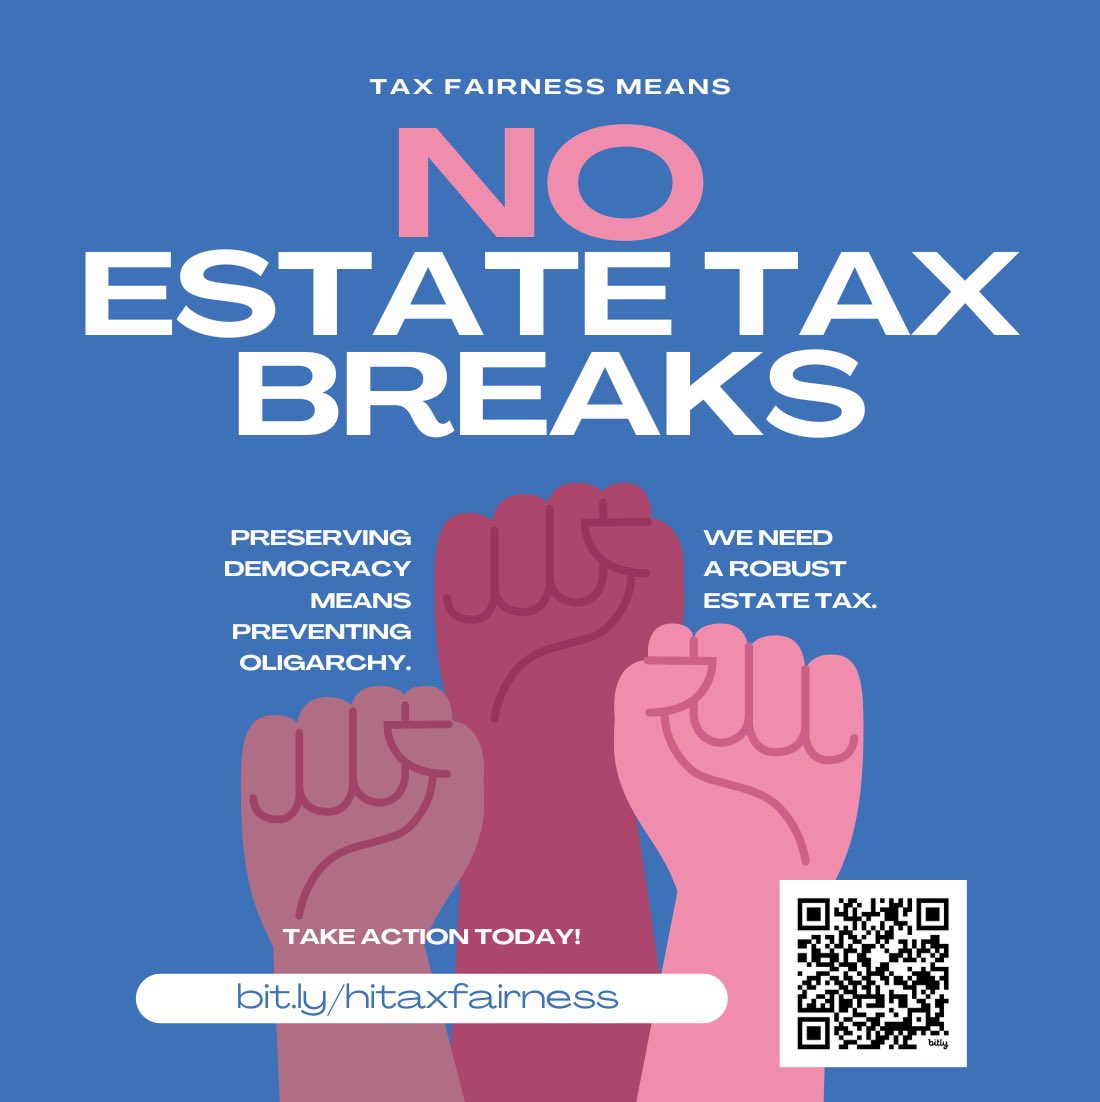 🚨🚨🚨 Submit testimony in opposition to SB3289 TODAY before 1 pm. Then use bit.ly/hitaxfairness to automatically send an email and make a phone call to your state house rep telling them to oppose this dangerous estate tax giveaway for the richest among us. #TaxTheRich